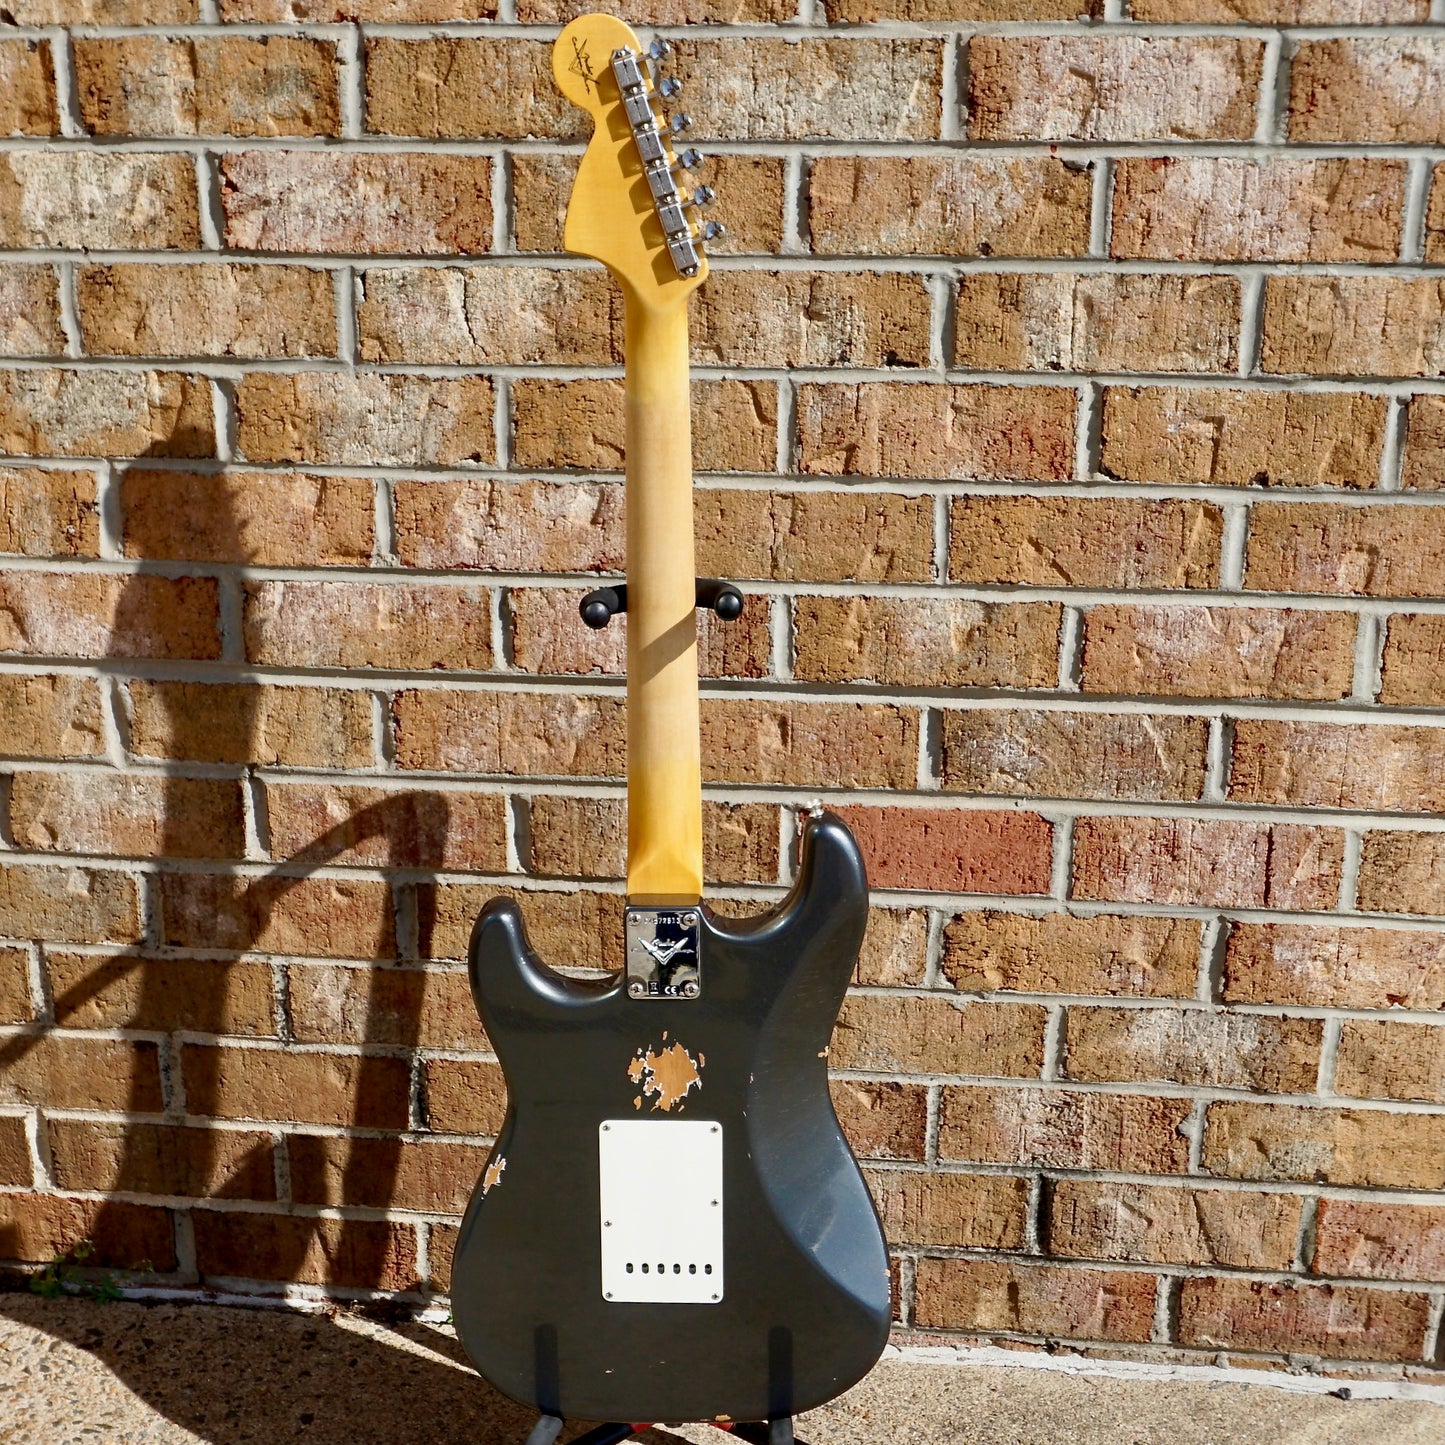 Fender Custom Shop 1967 Stratocaster Relic with Closet Classic Hardware 3A Rosewood Fingerboard Aged Charcoal Frost Metallic